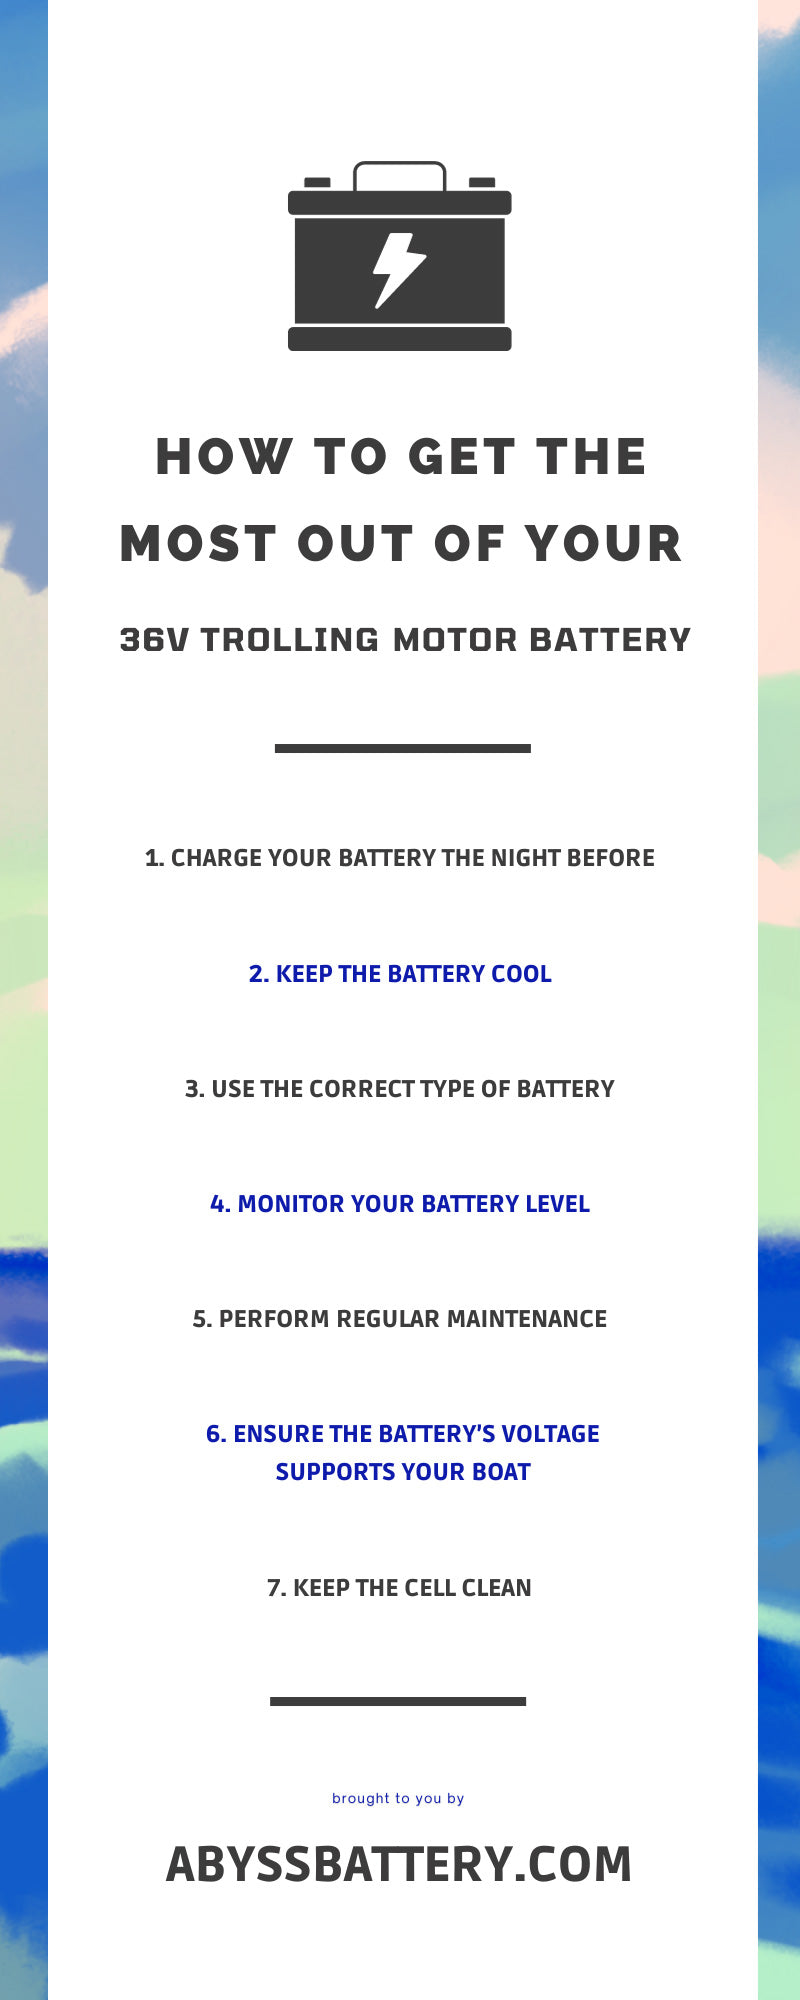 How To Get the Most Out of Your 36V Trolling Motor Battery